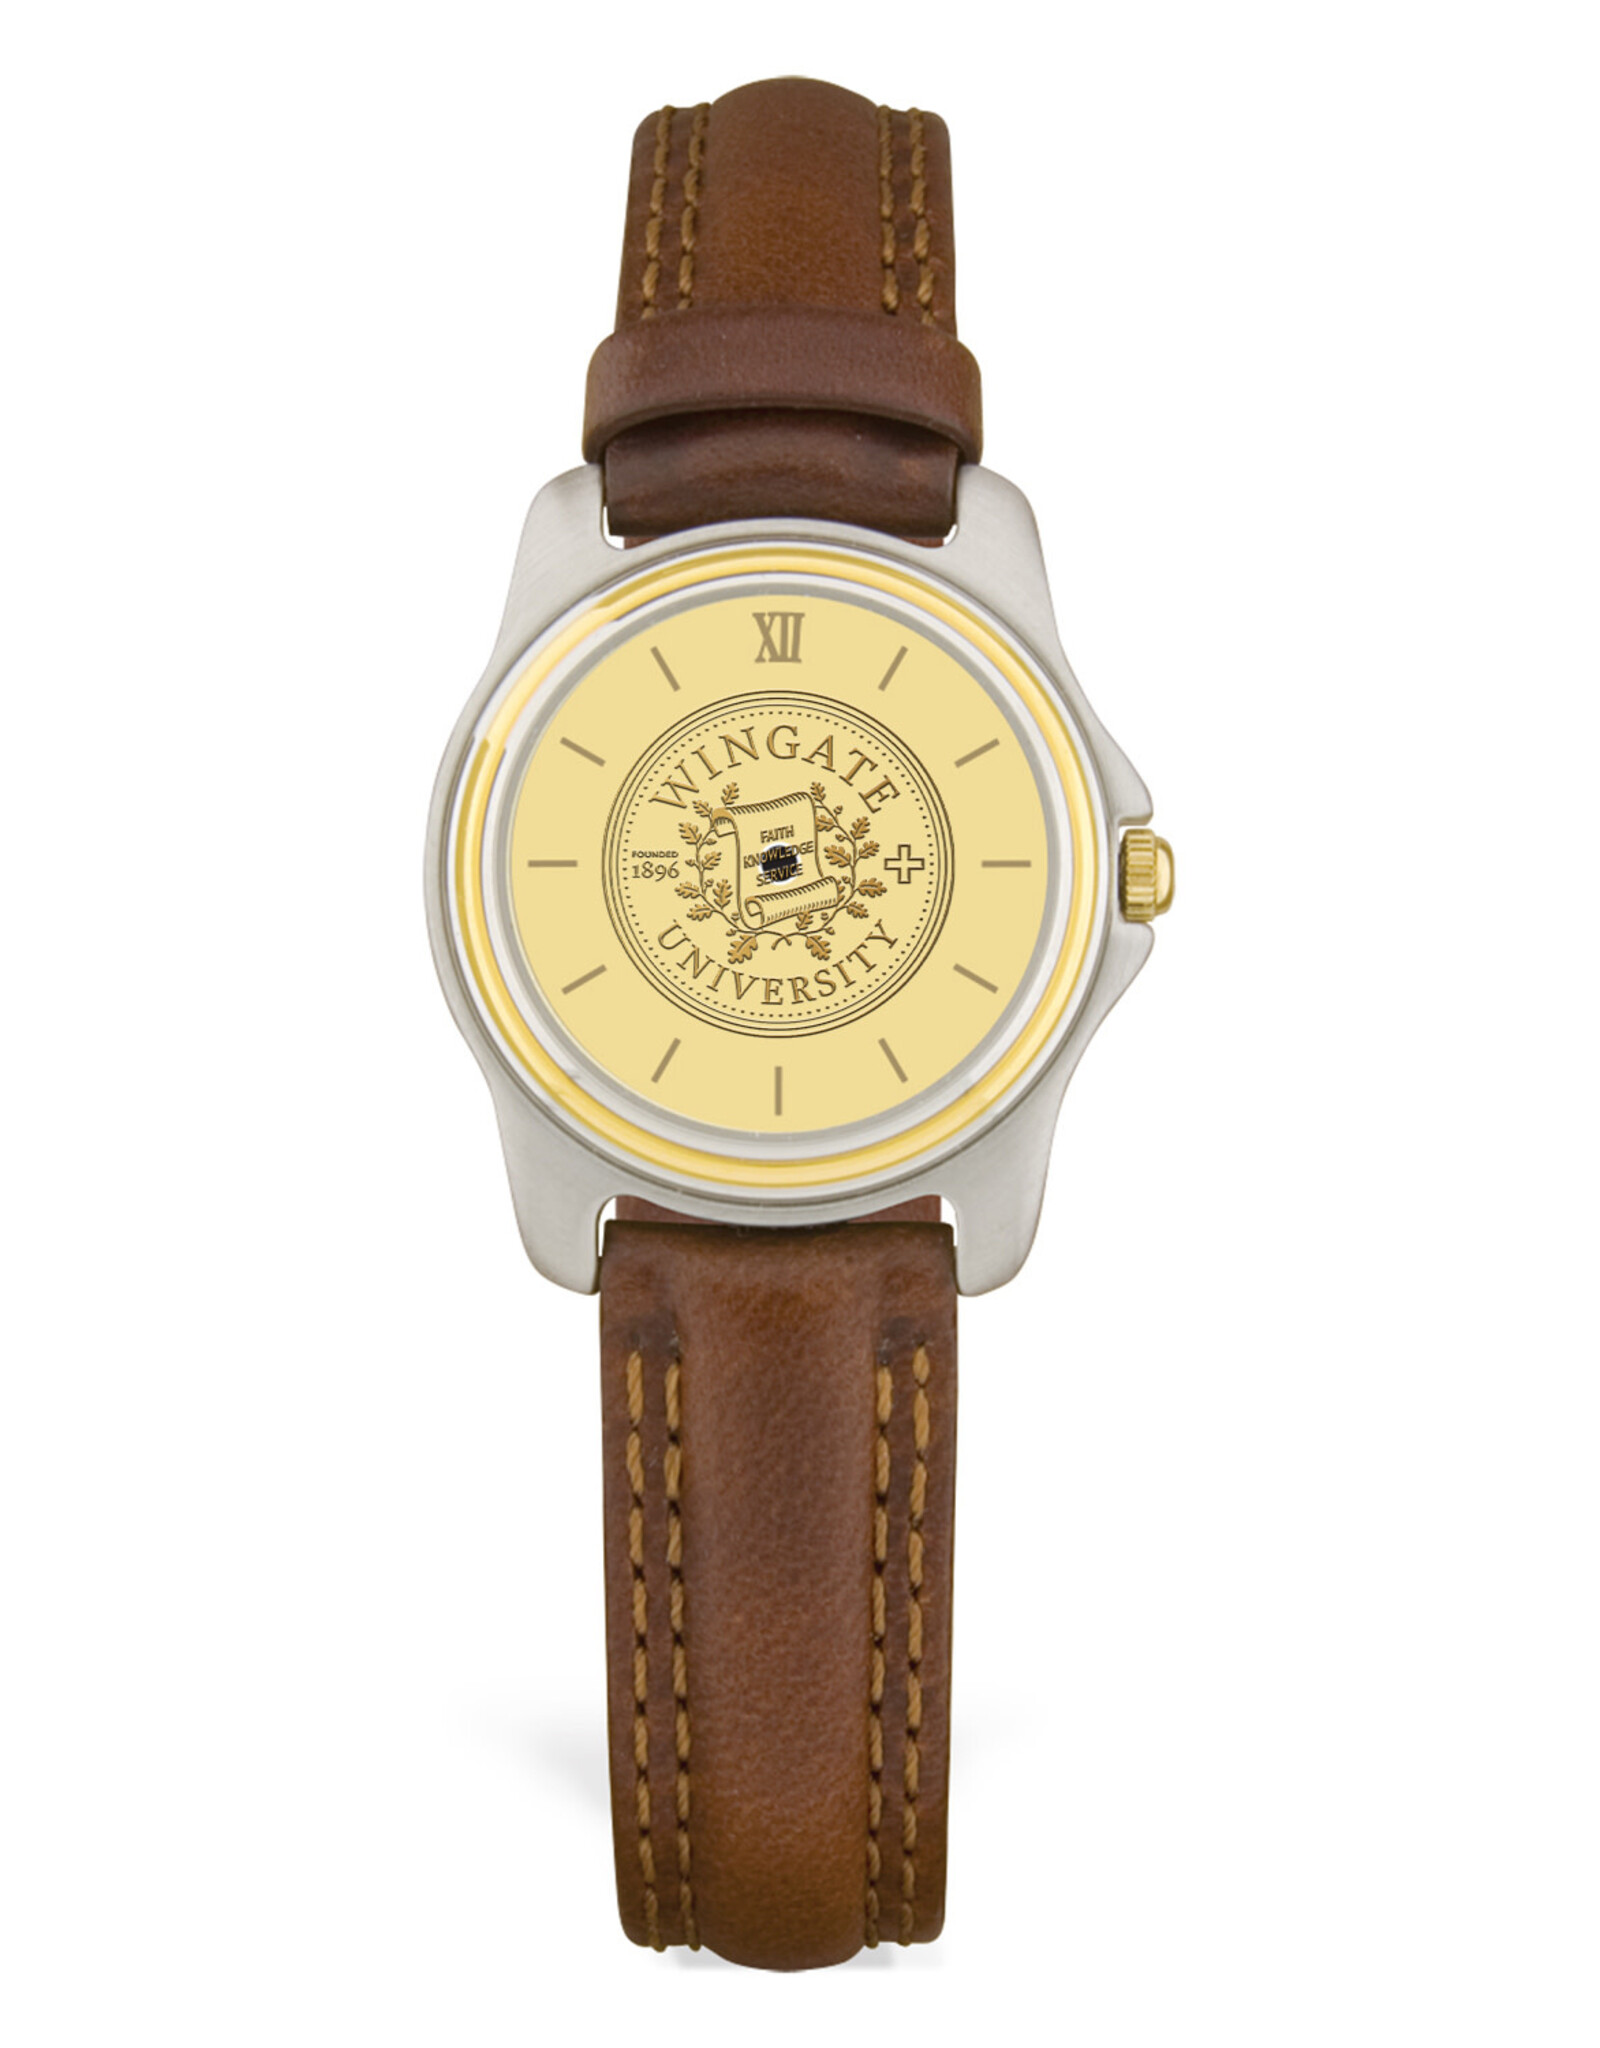 Copy of DROP SHIP ONLY Mens Brown Leather Wristwatch with Gold Wingate Seal Face (ONLINE ONLY)